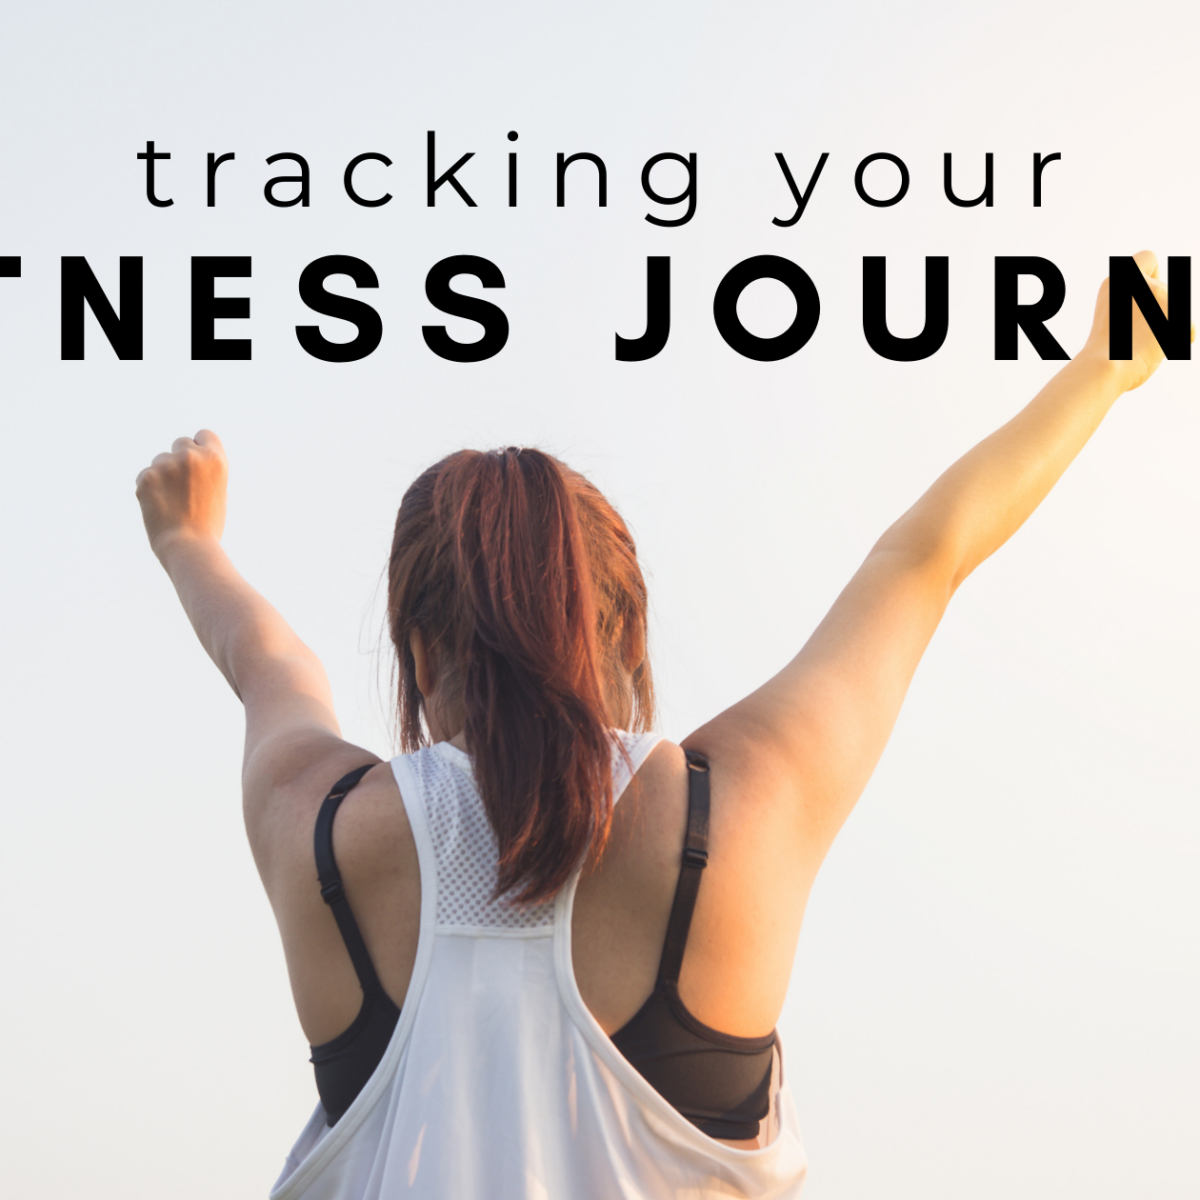 Fitness Journey: Improve Your Life Through Fitness Journals